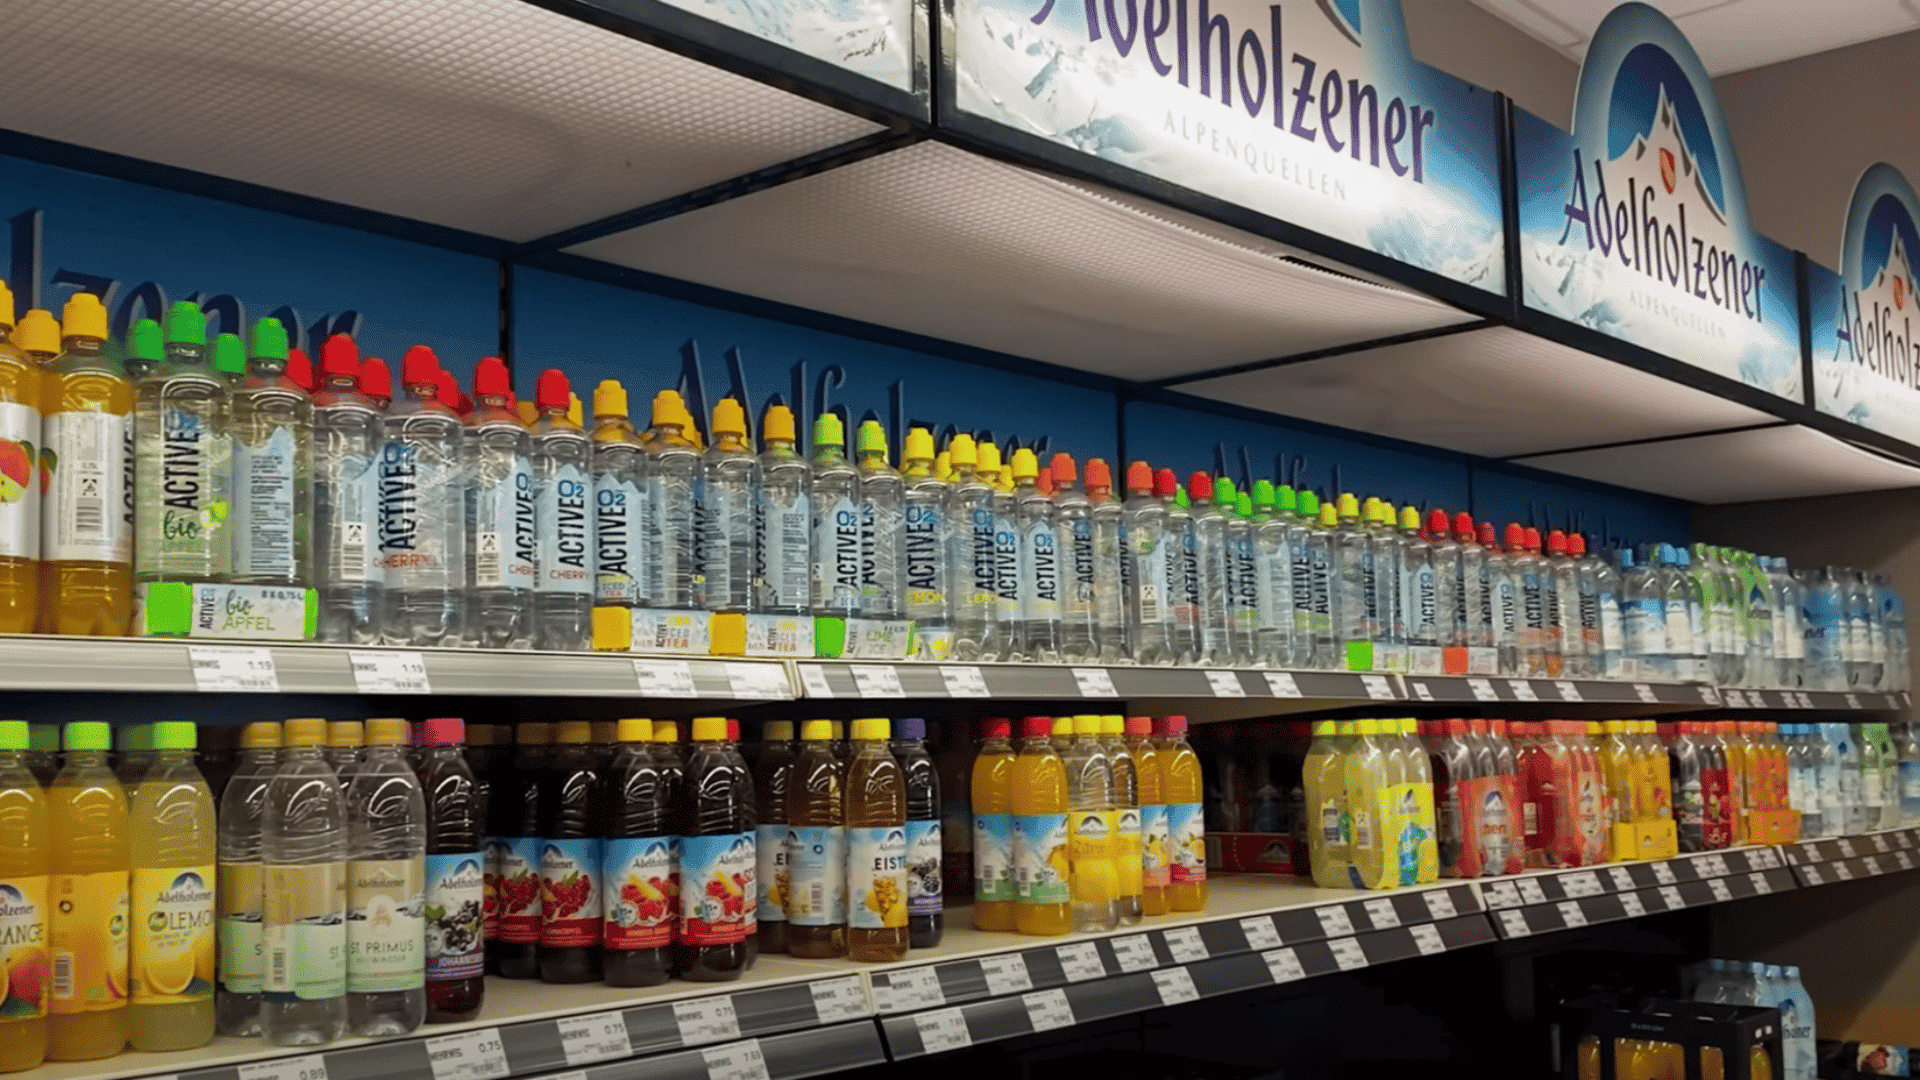 The Most Popular Drinks in Germany - that aren't beer! Here is a drink aisle in our local supermarket